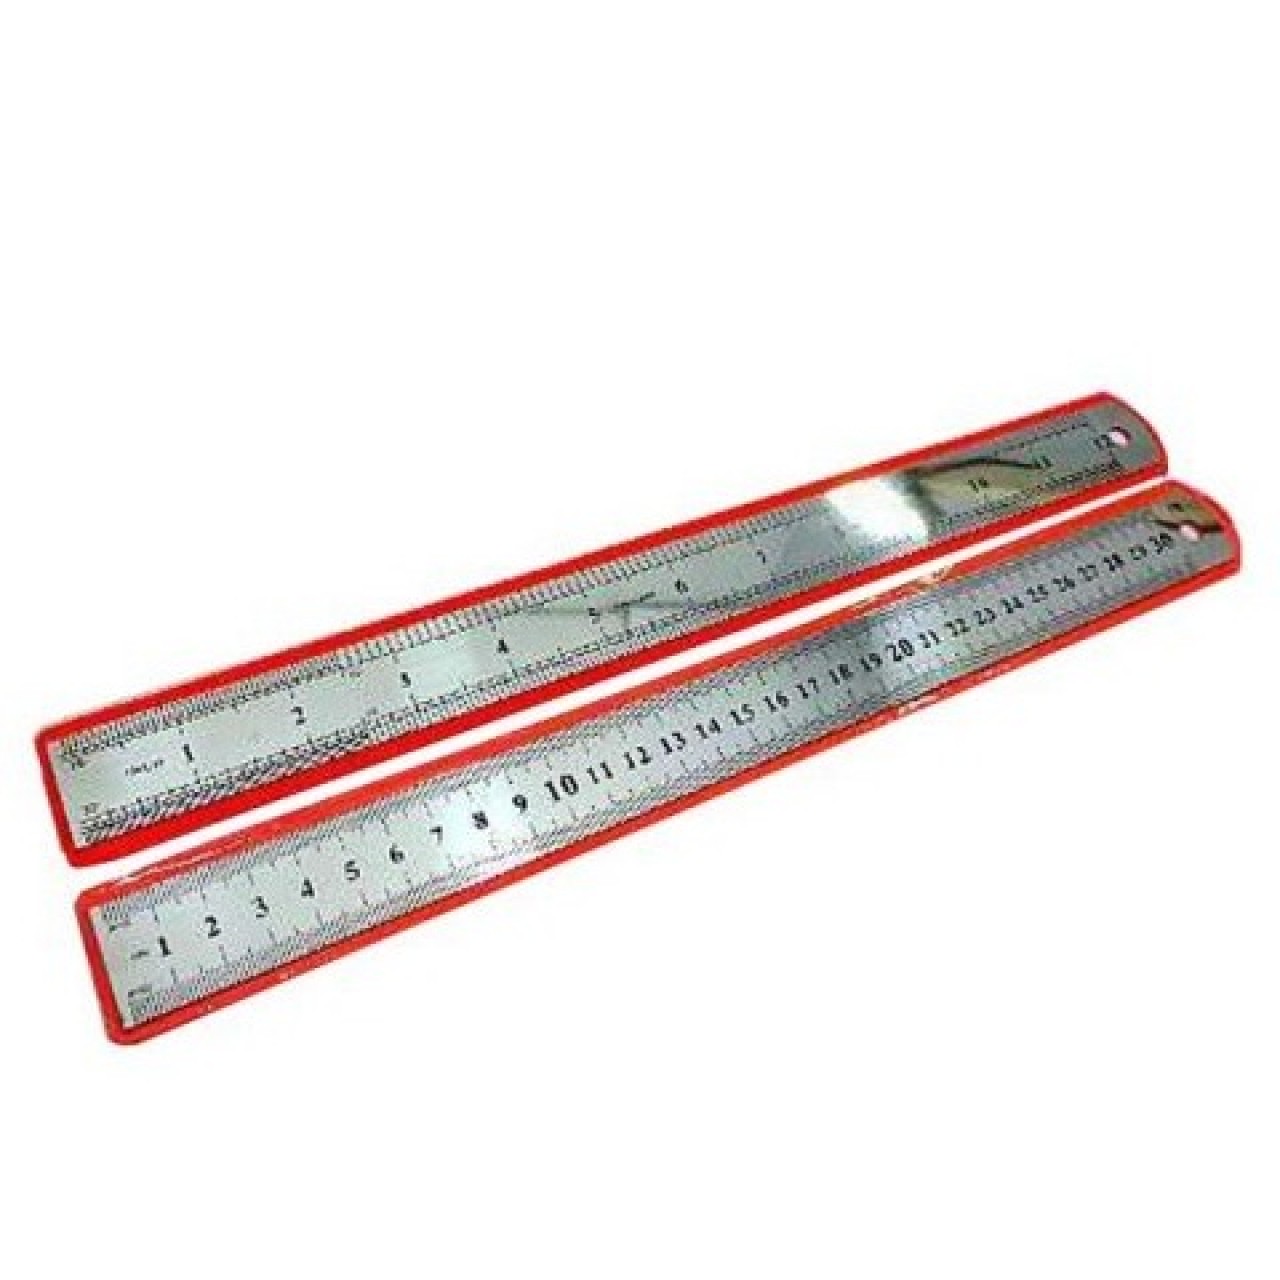 The Stainless Steel Ruler 12-Inches - Silver pack of 2